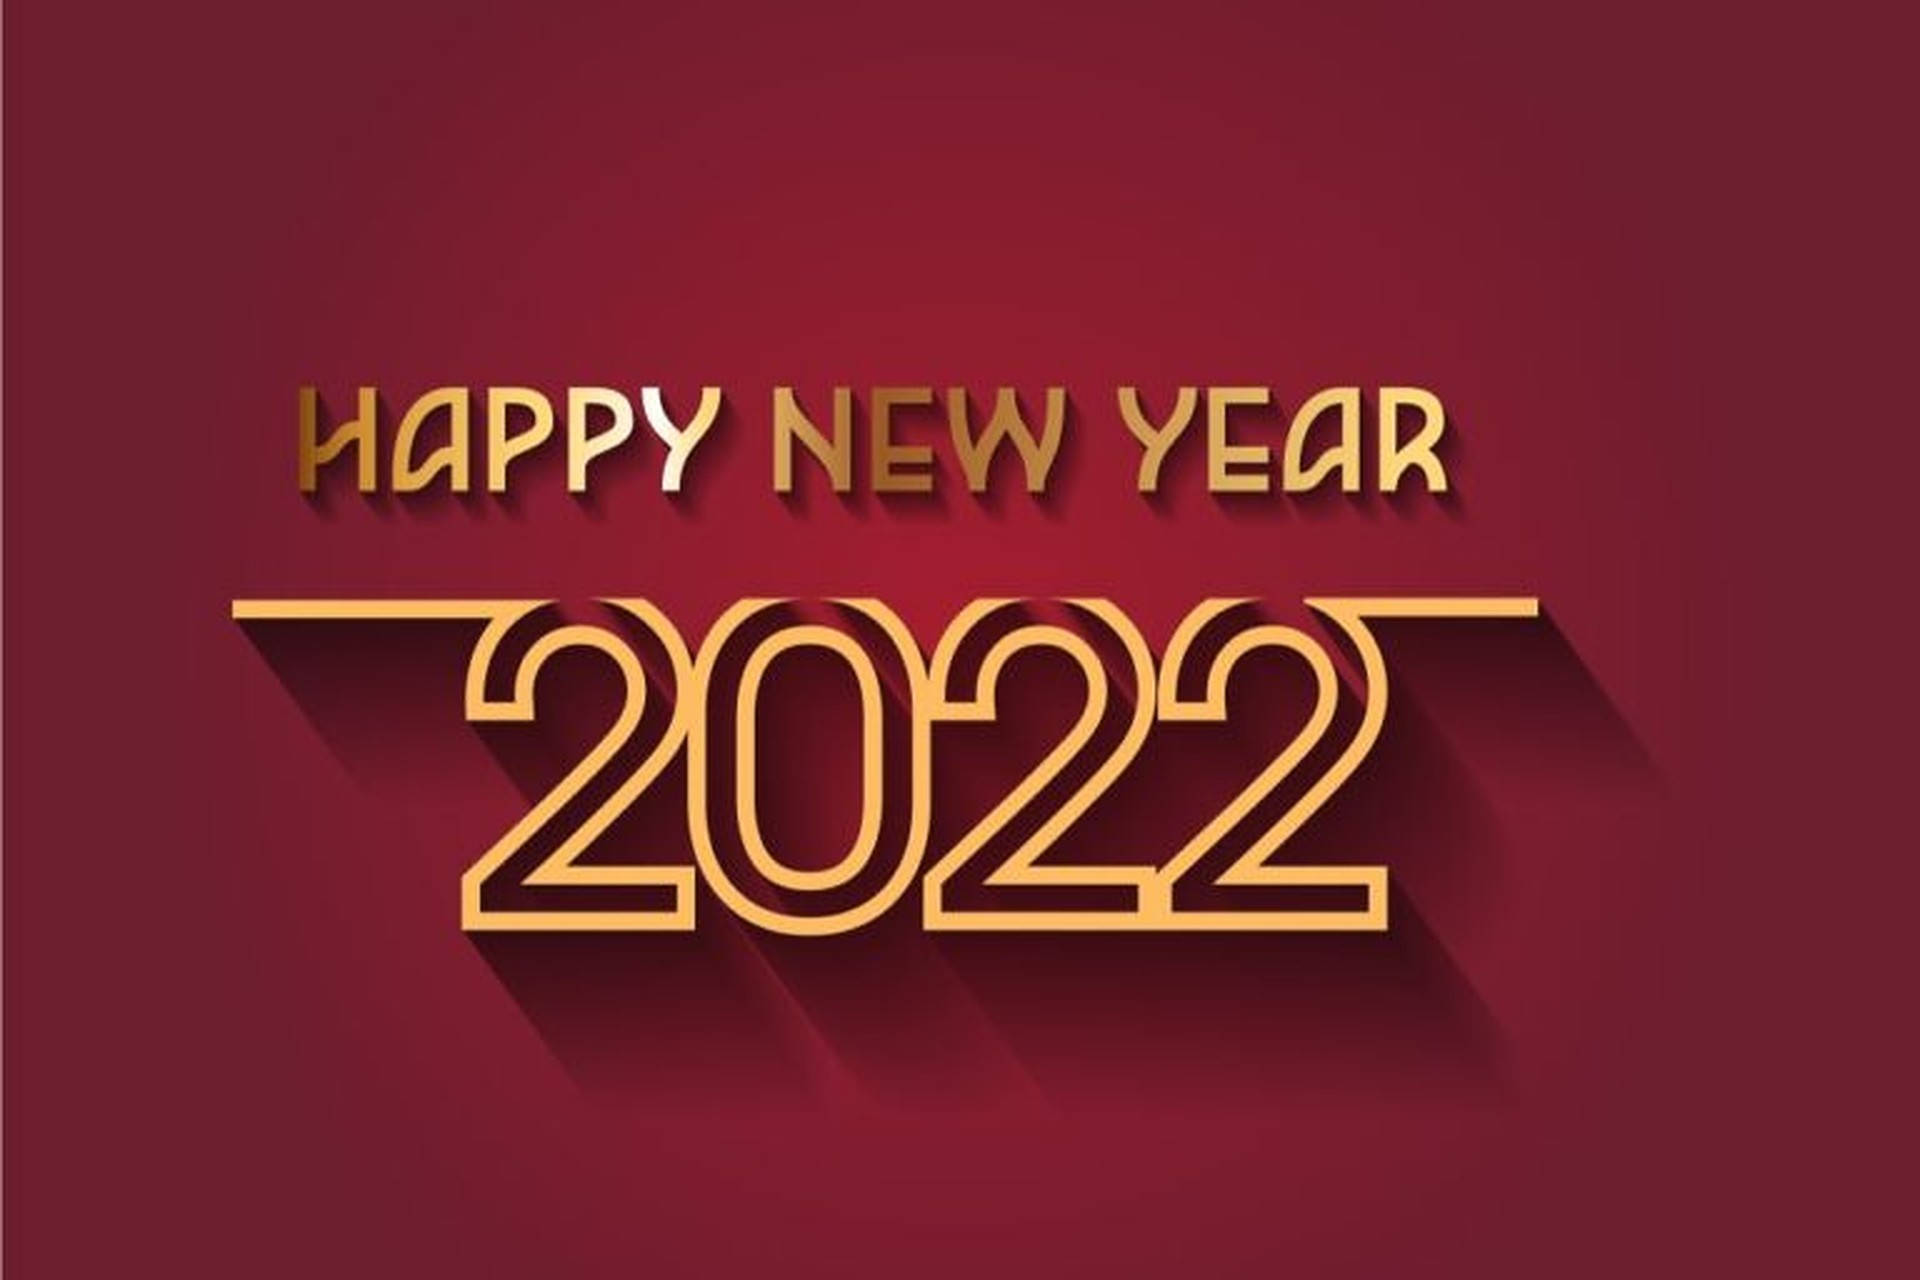 Happy New Year 2022 Red Gold Background